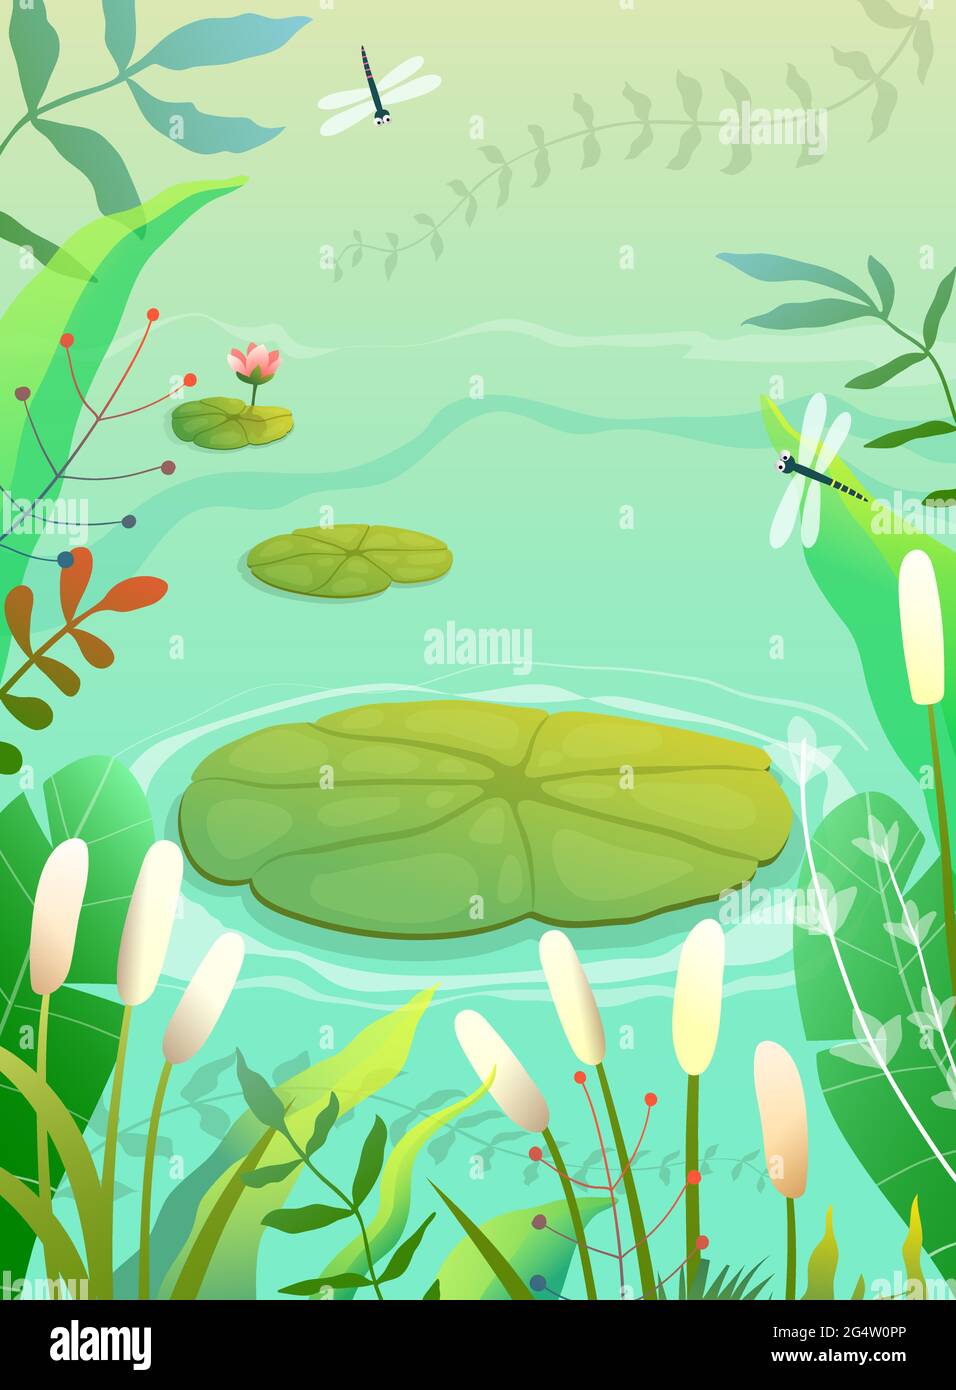 Pond Swamp or Marshland Nature Background Stock Vector